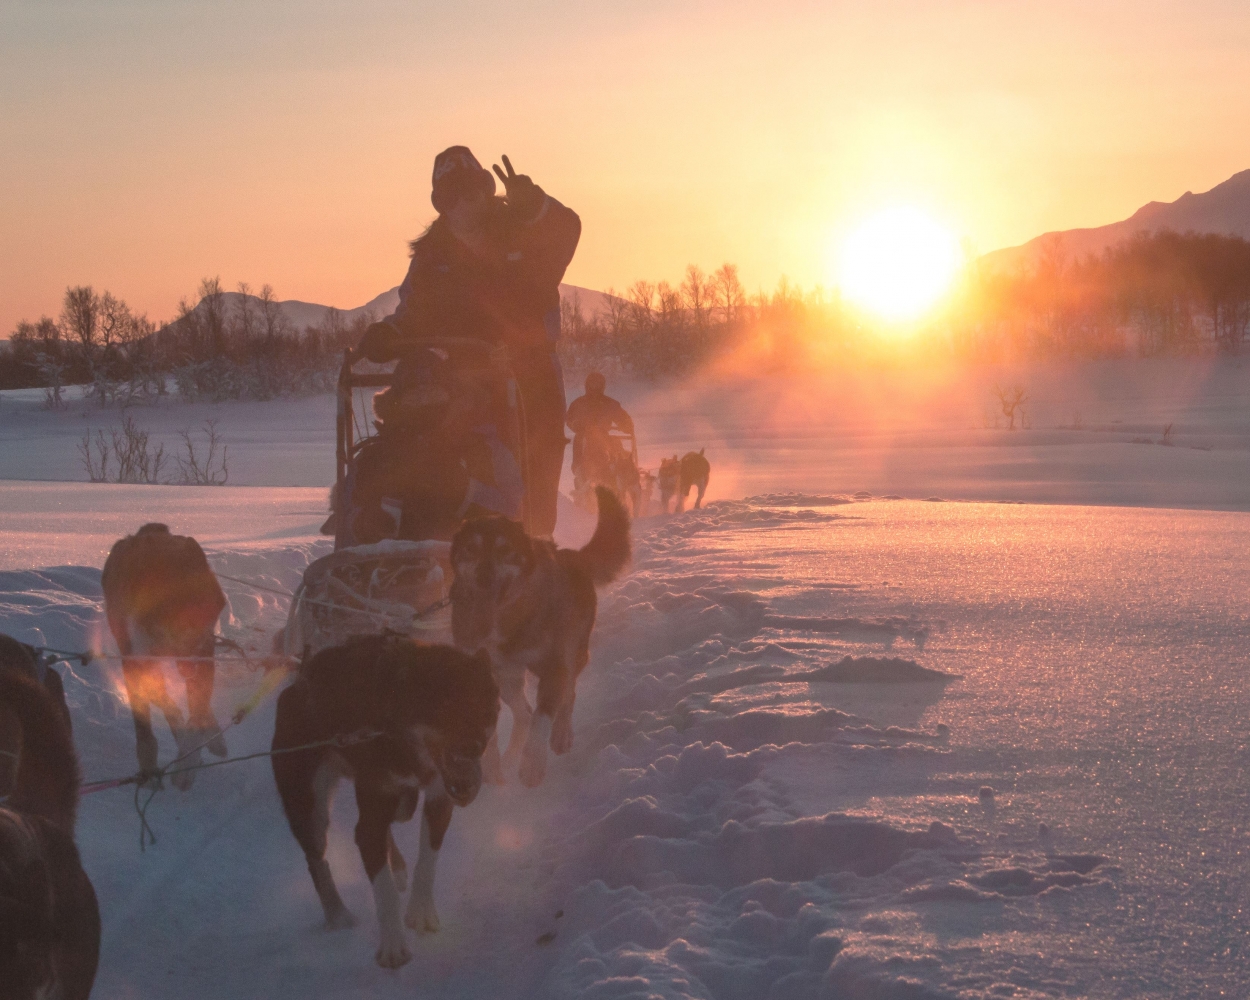 Dog sledding with bright orange sun in the backgrounbd